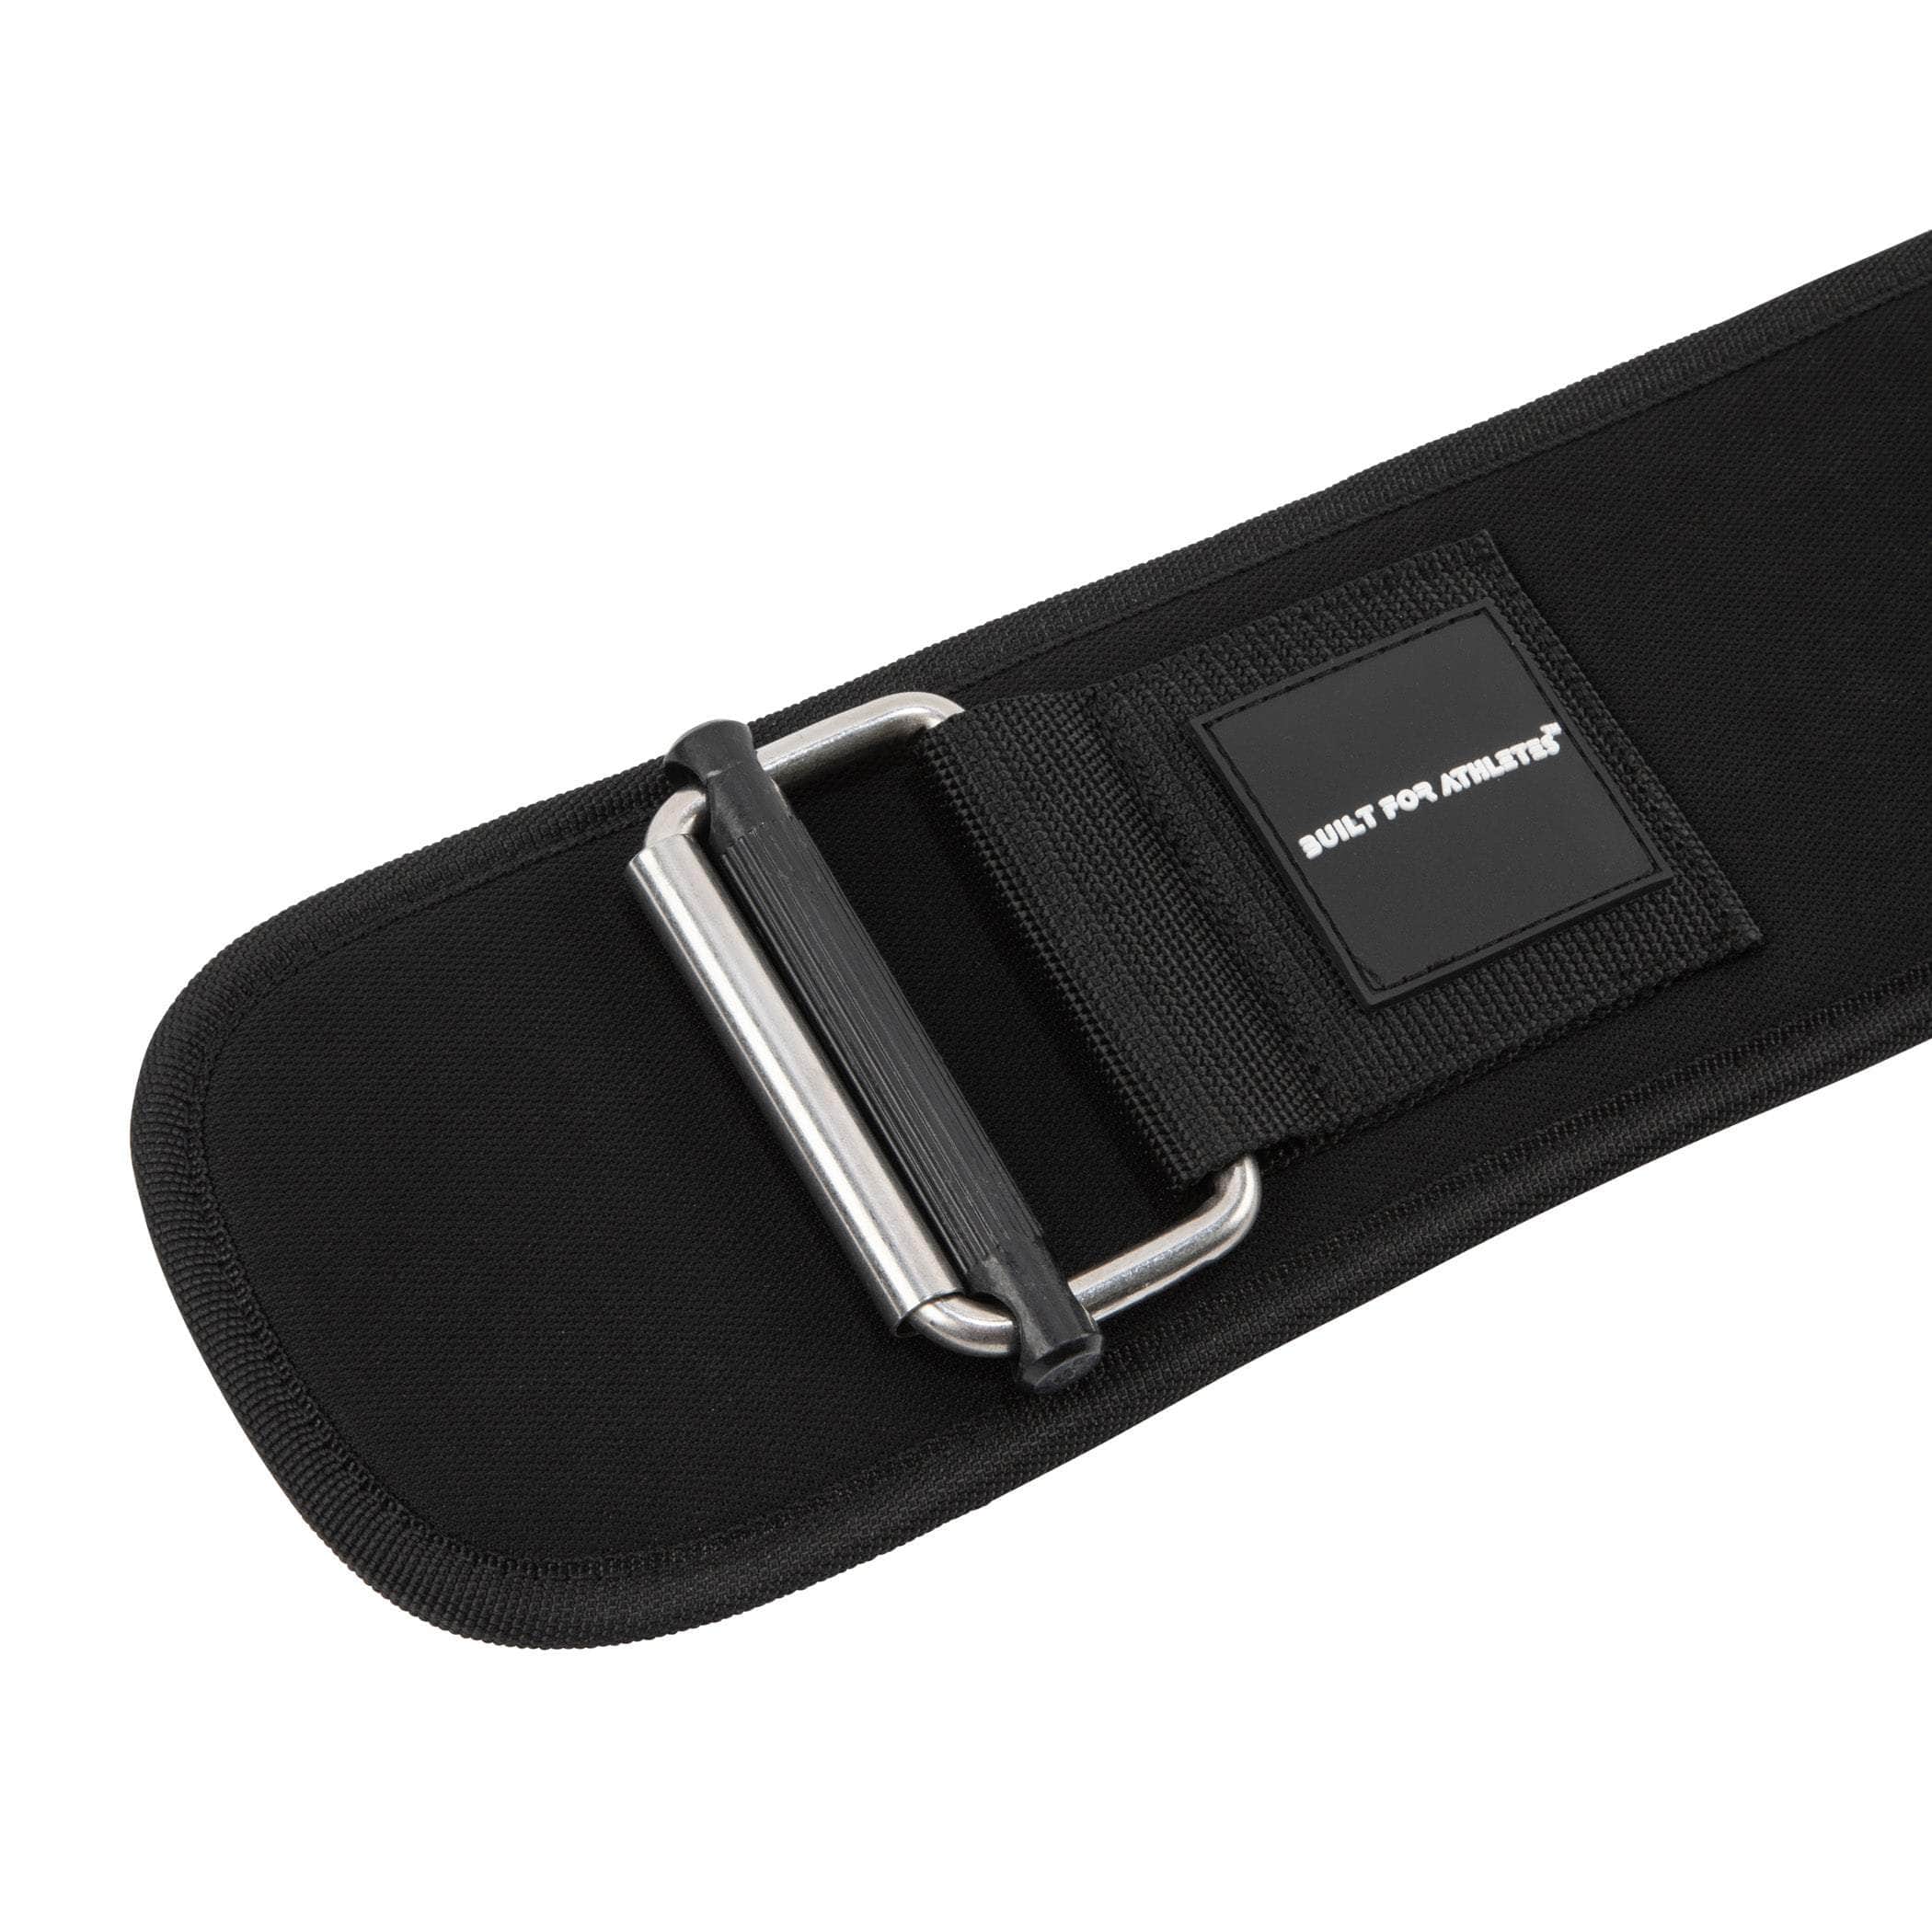 Built for Athletes™ Accessories Weightlifting Belt